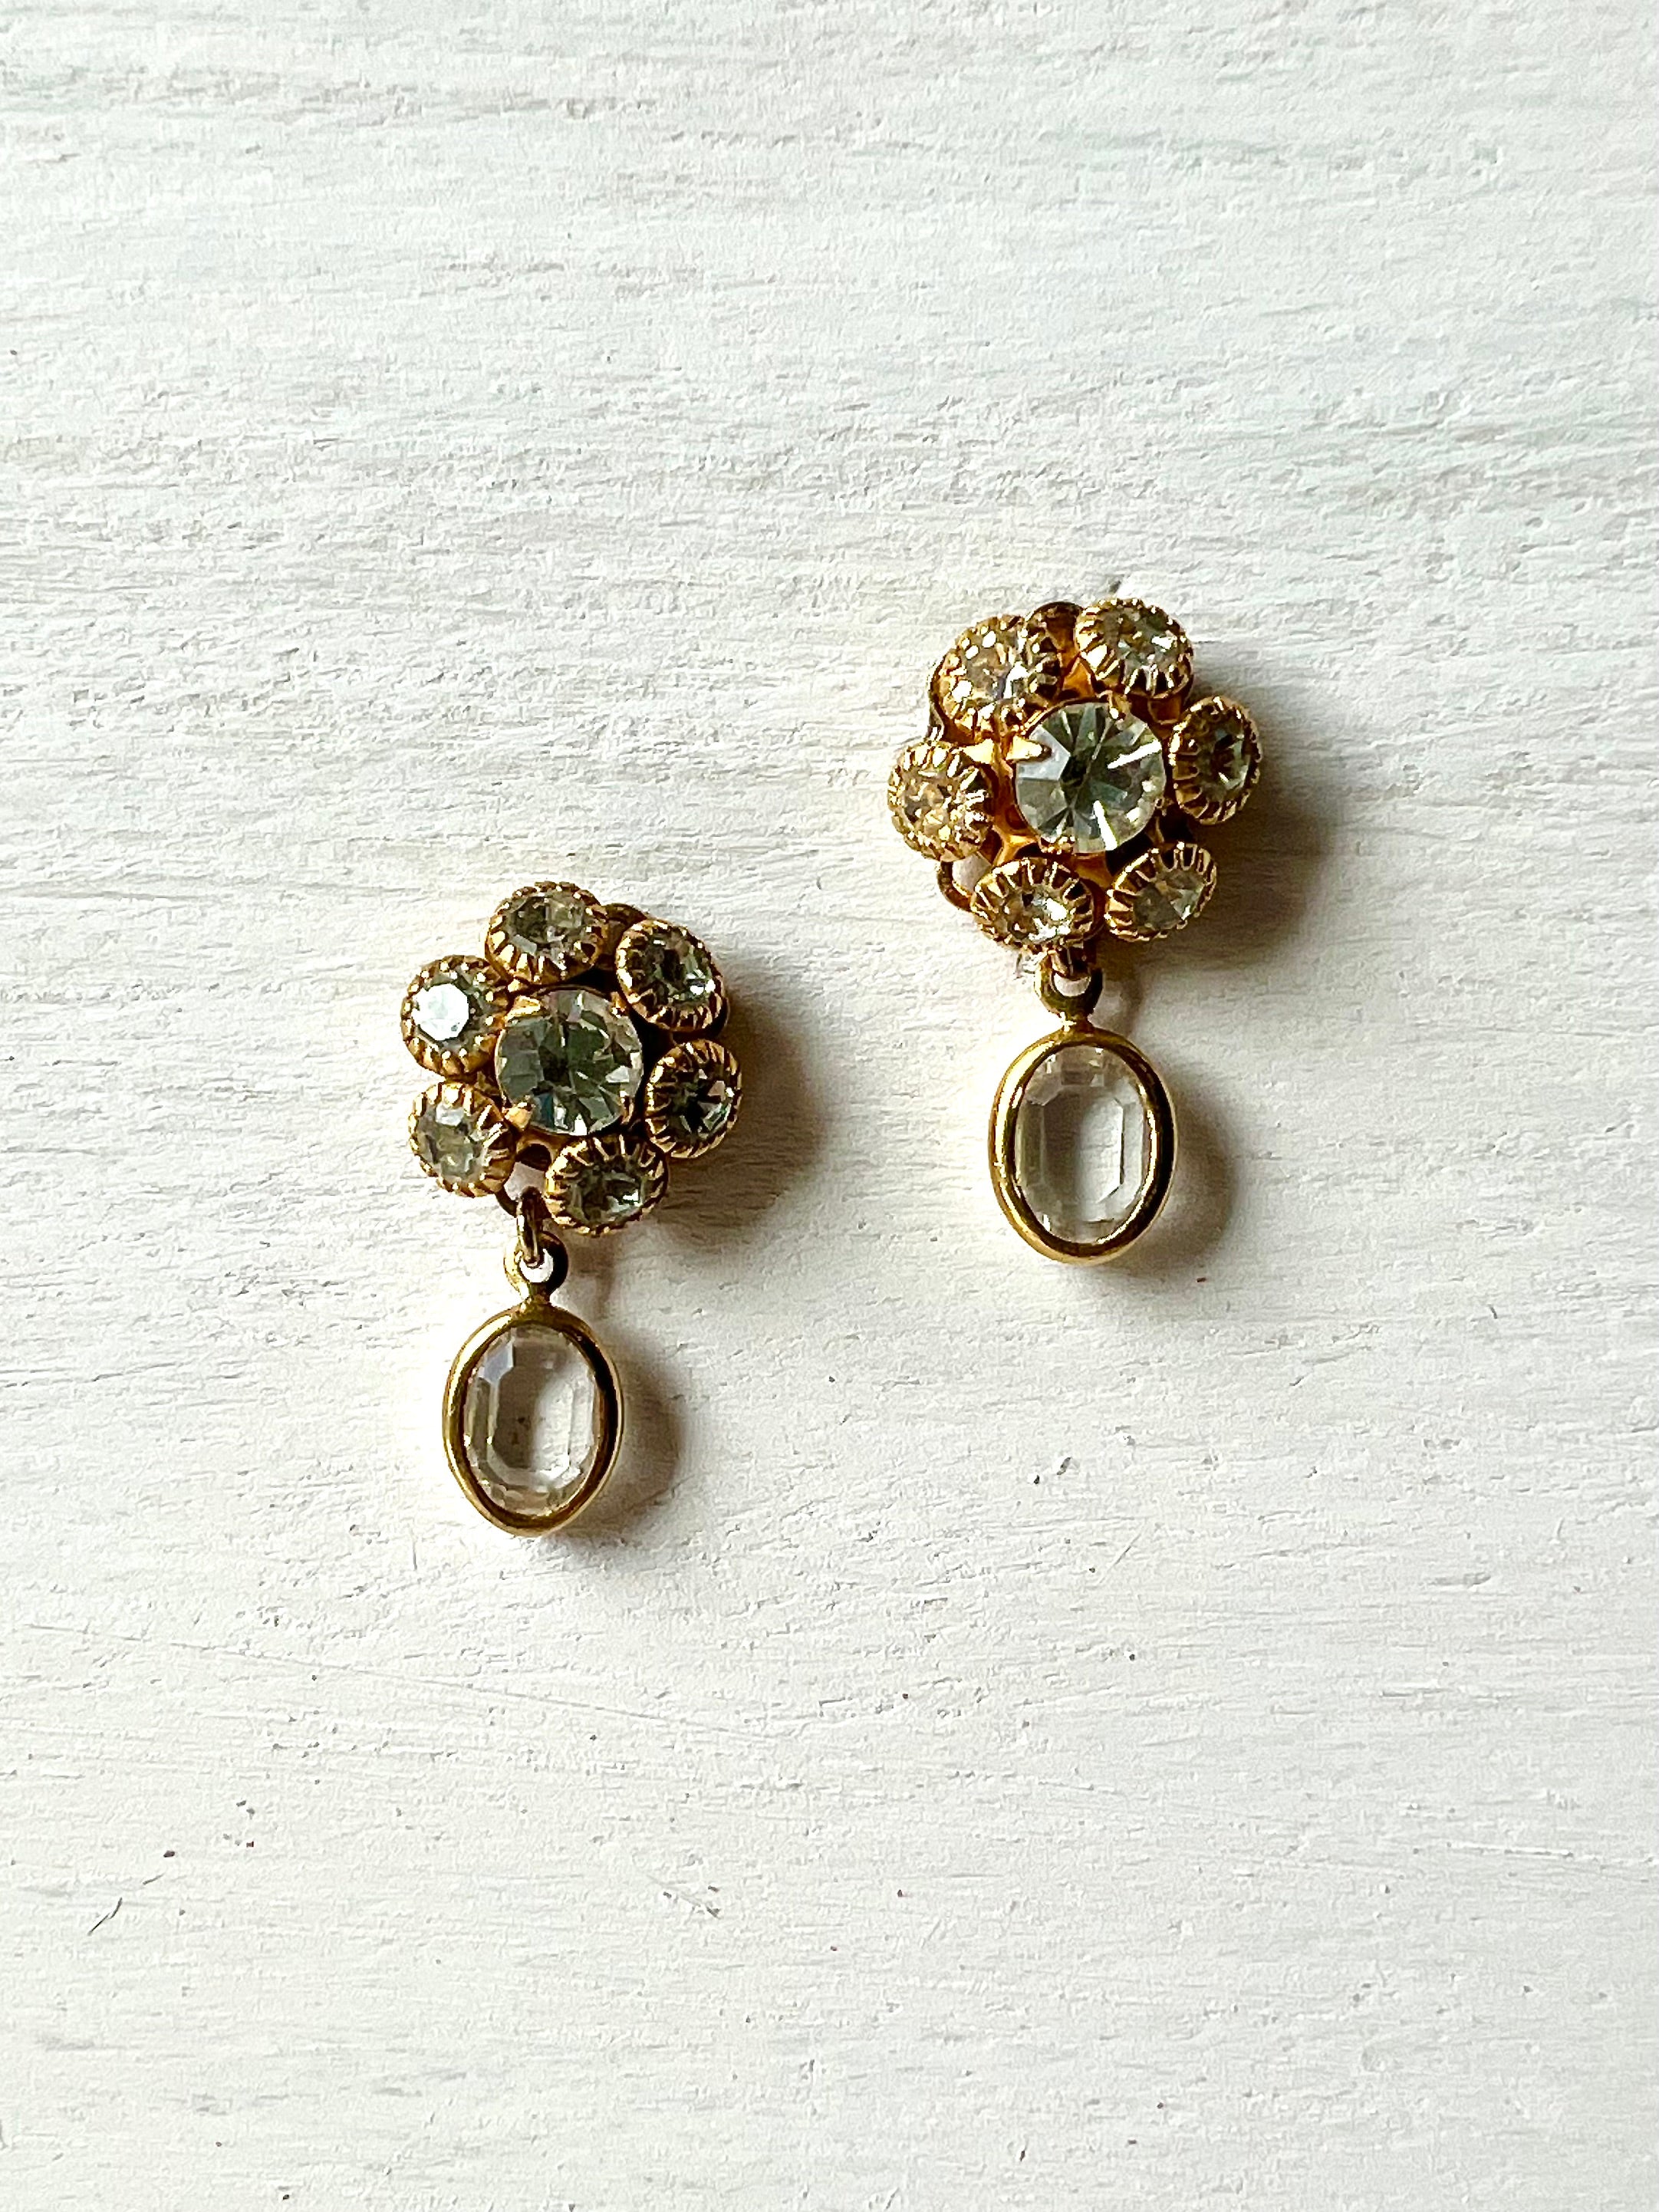 RGS-E050: Handcrafted Crystal Earrings